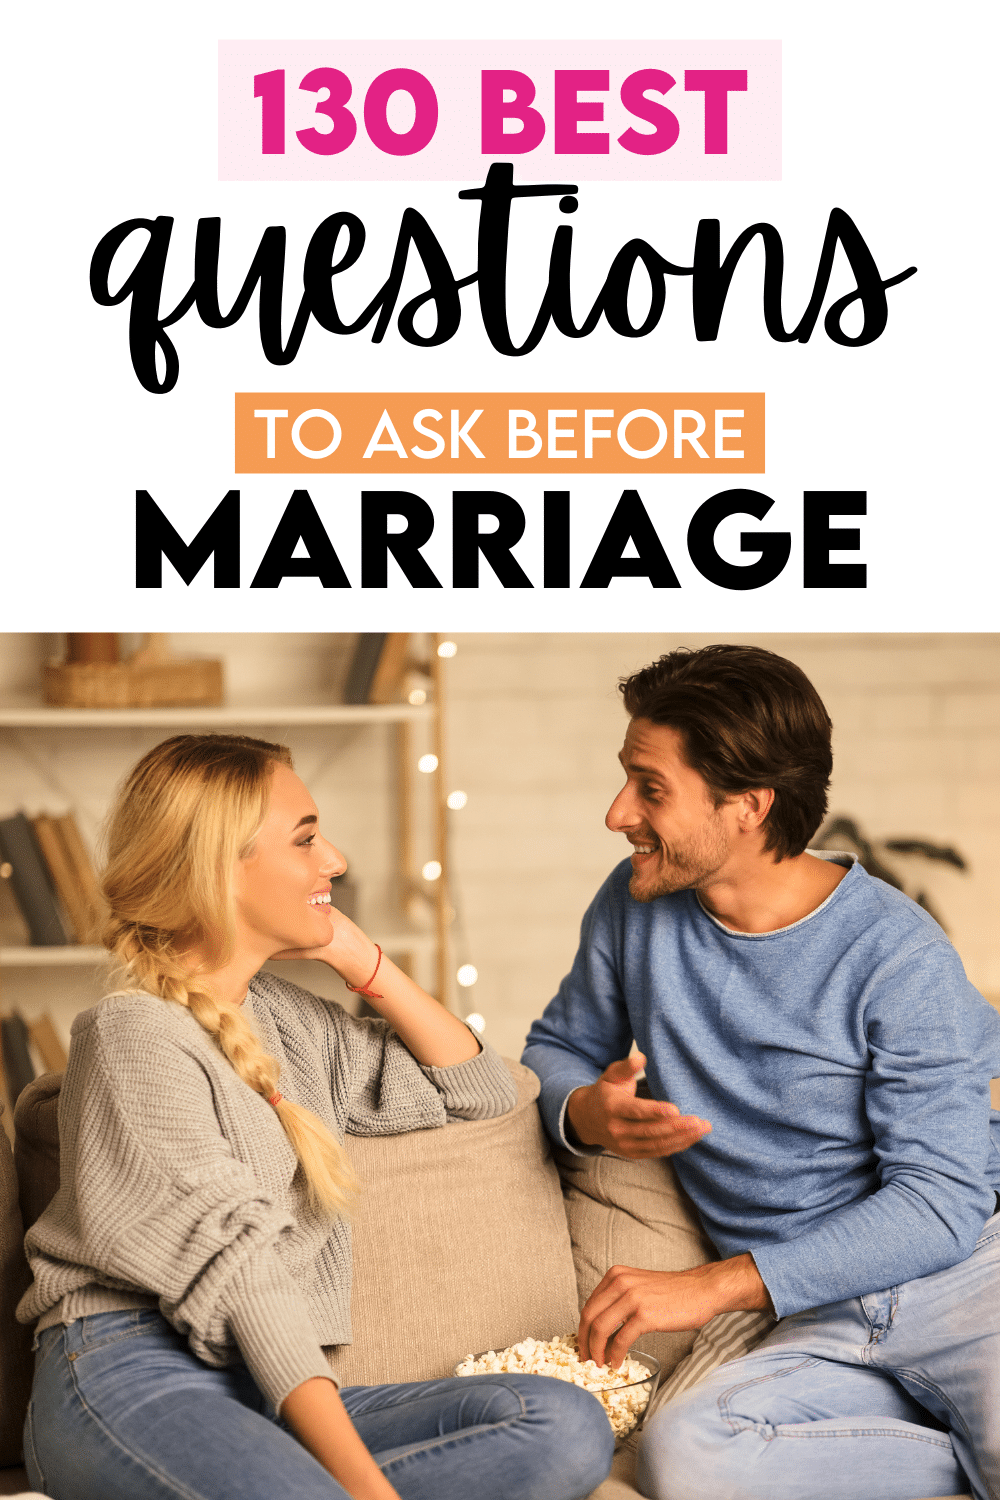 Take a look at our huge list of 130 best questions to ask before marriage! | The Dating Divas